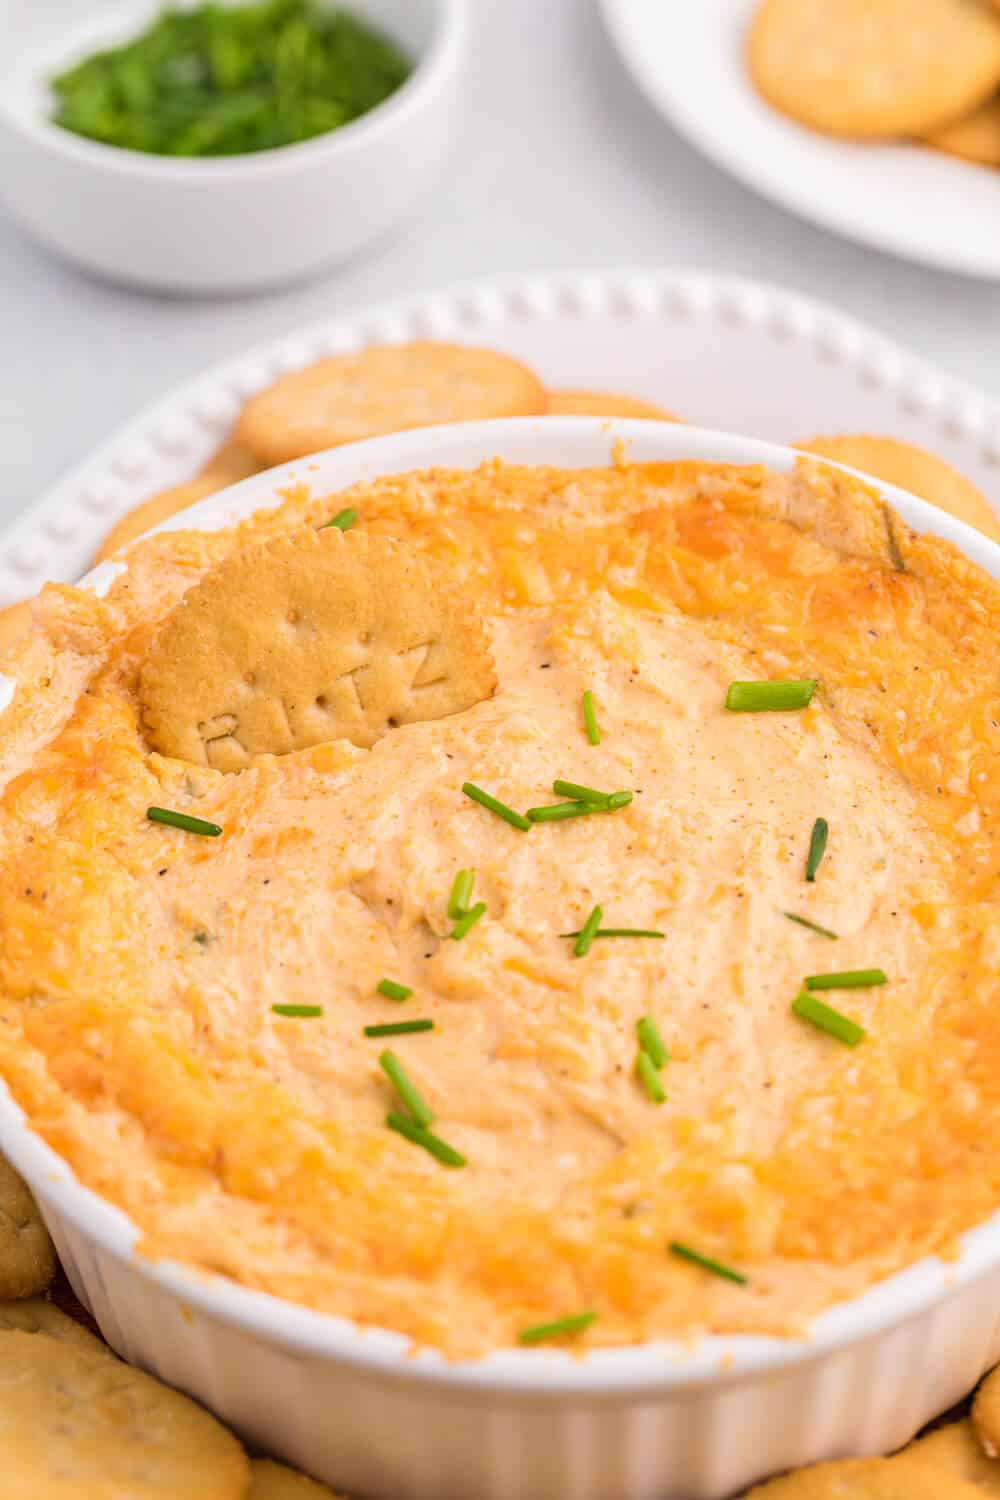 Crab dip with a Ritz cracker in it.